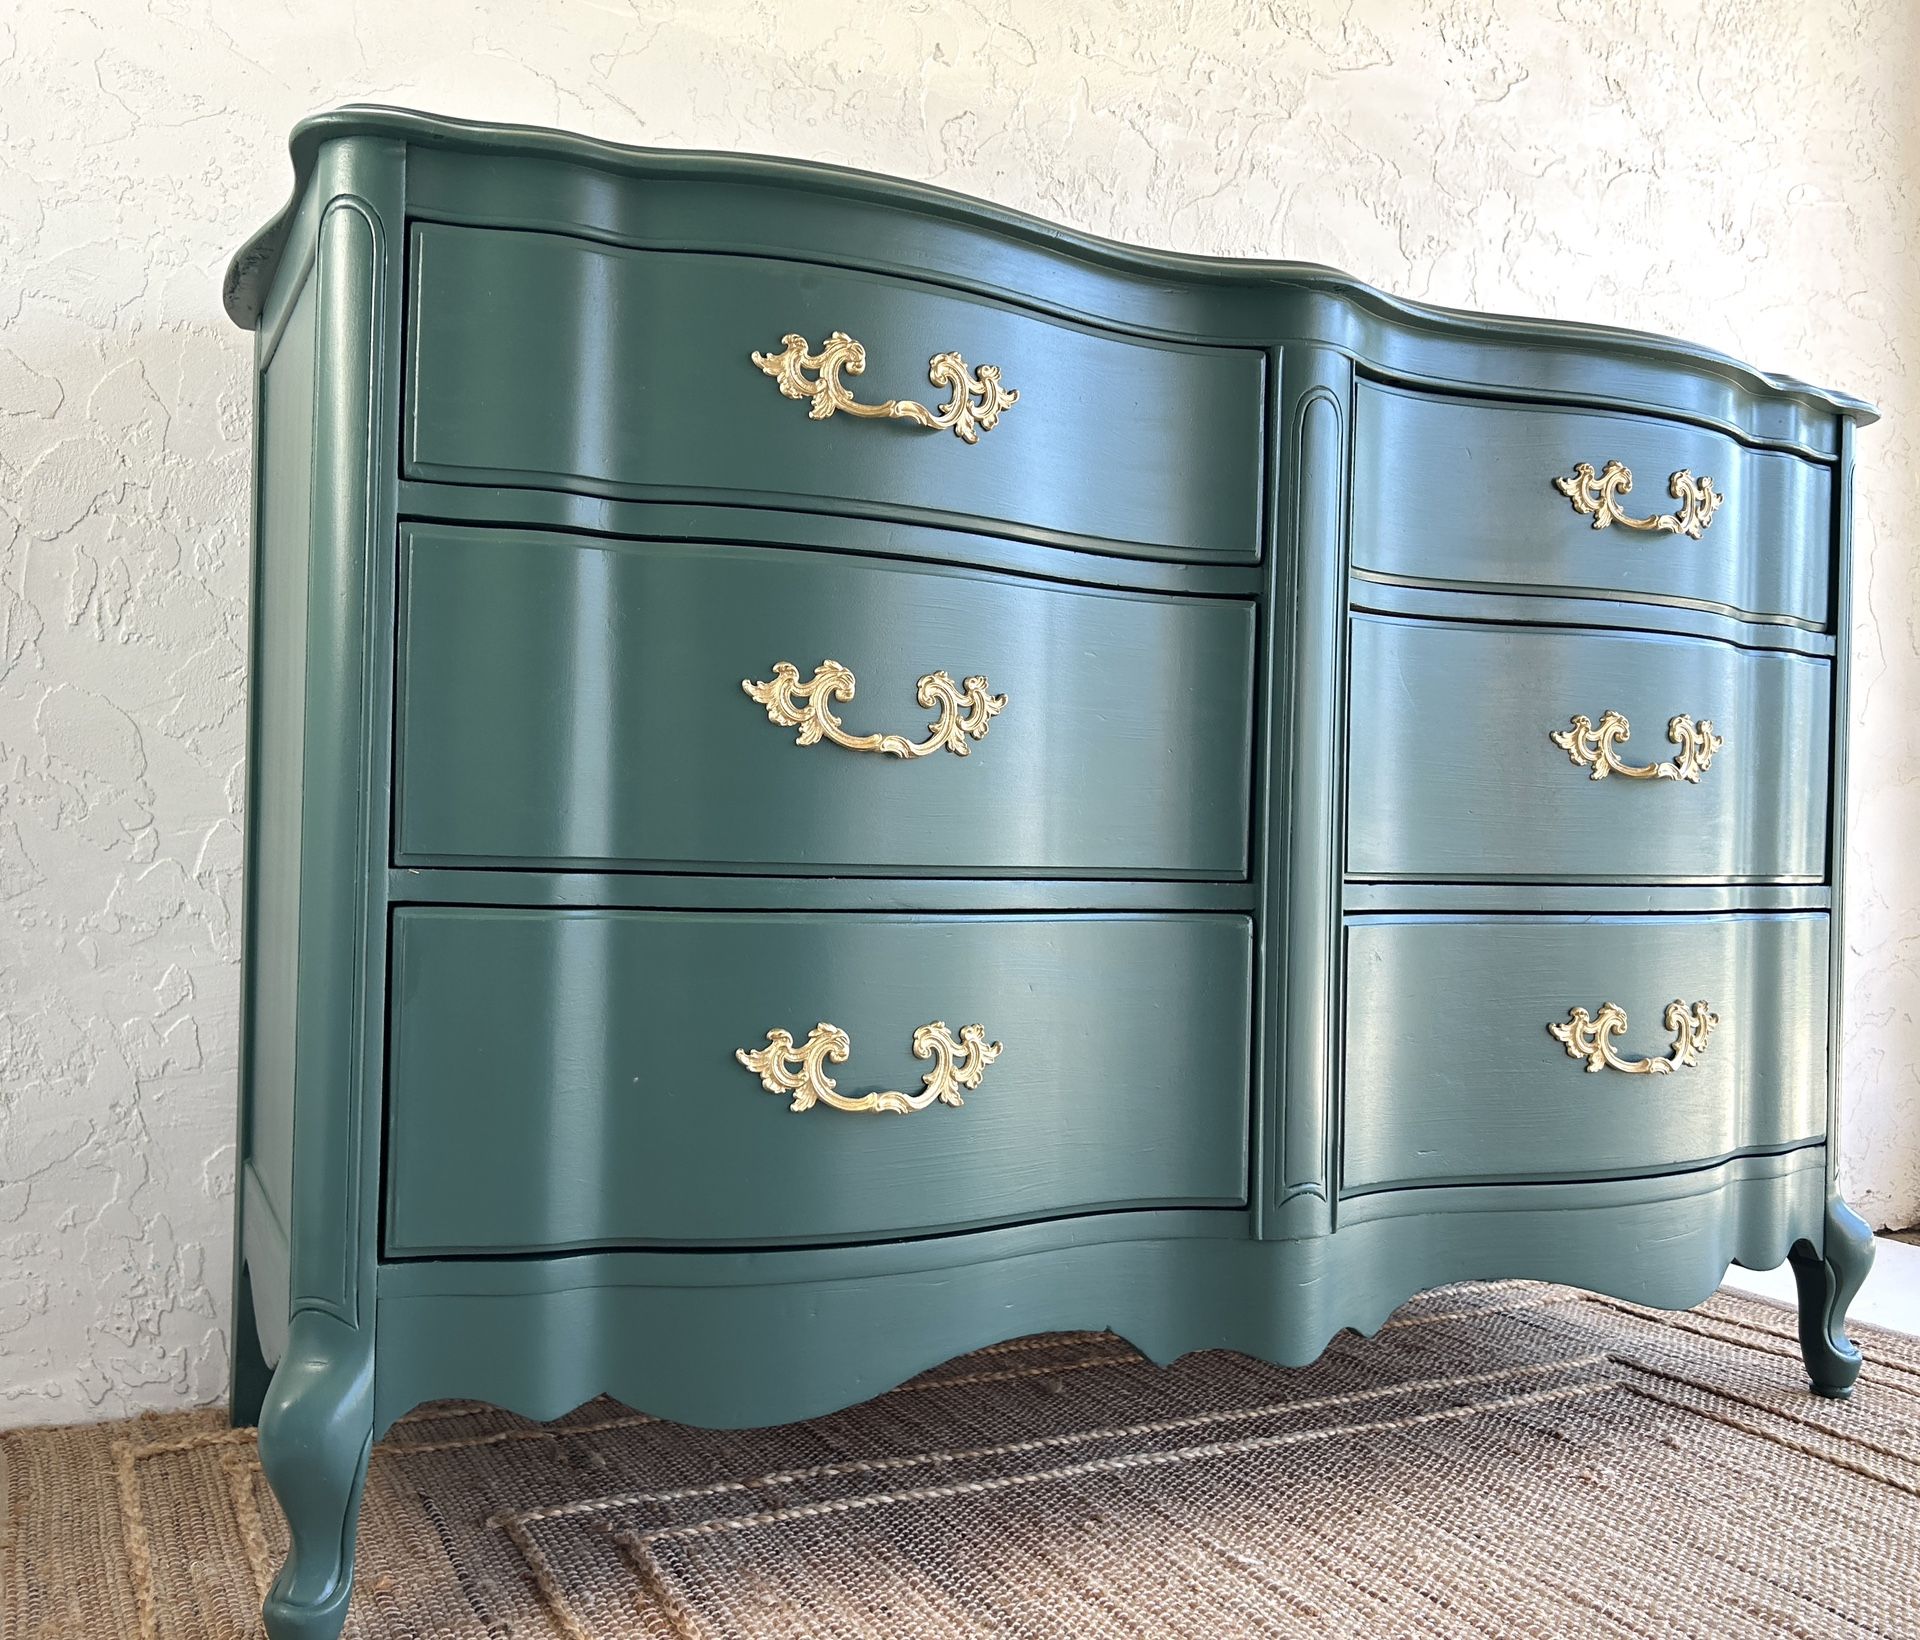 Refinished Lovely Six Drawer French Solid Wood Dresser